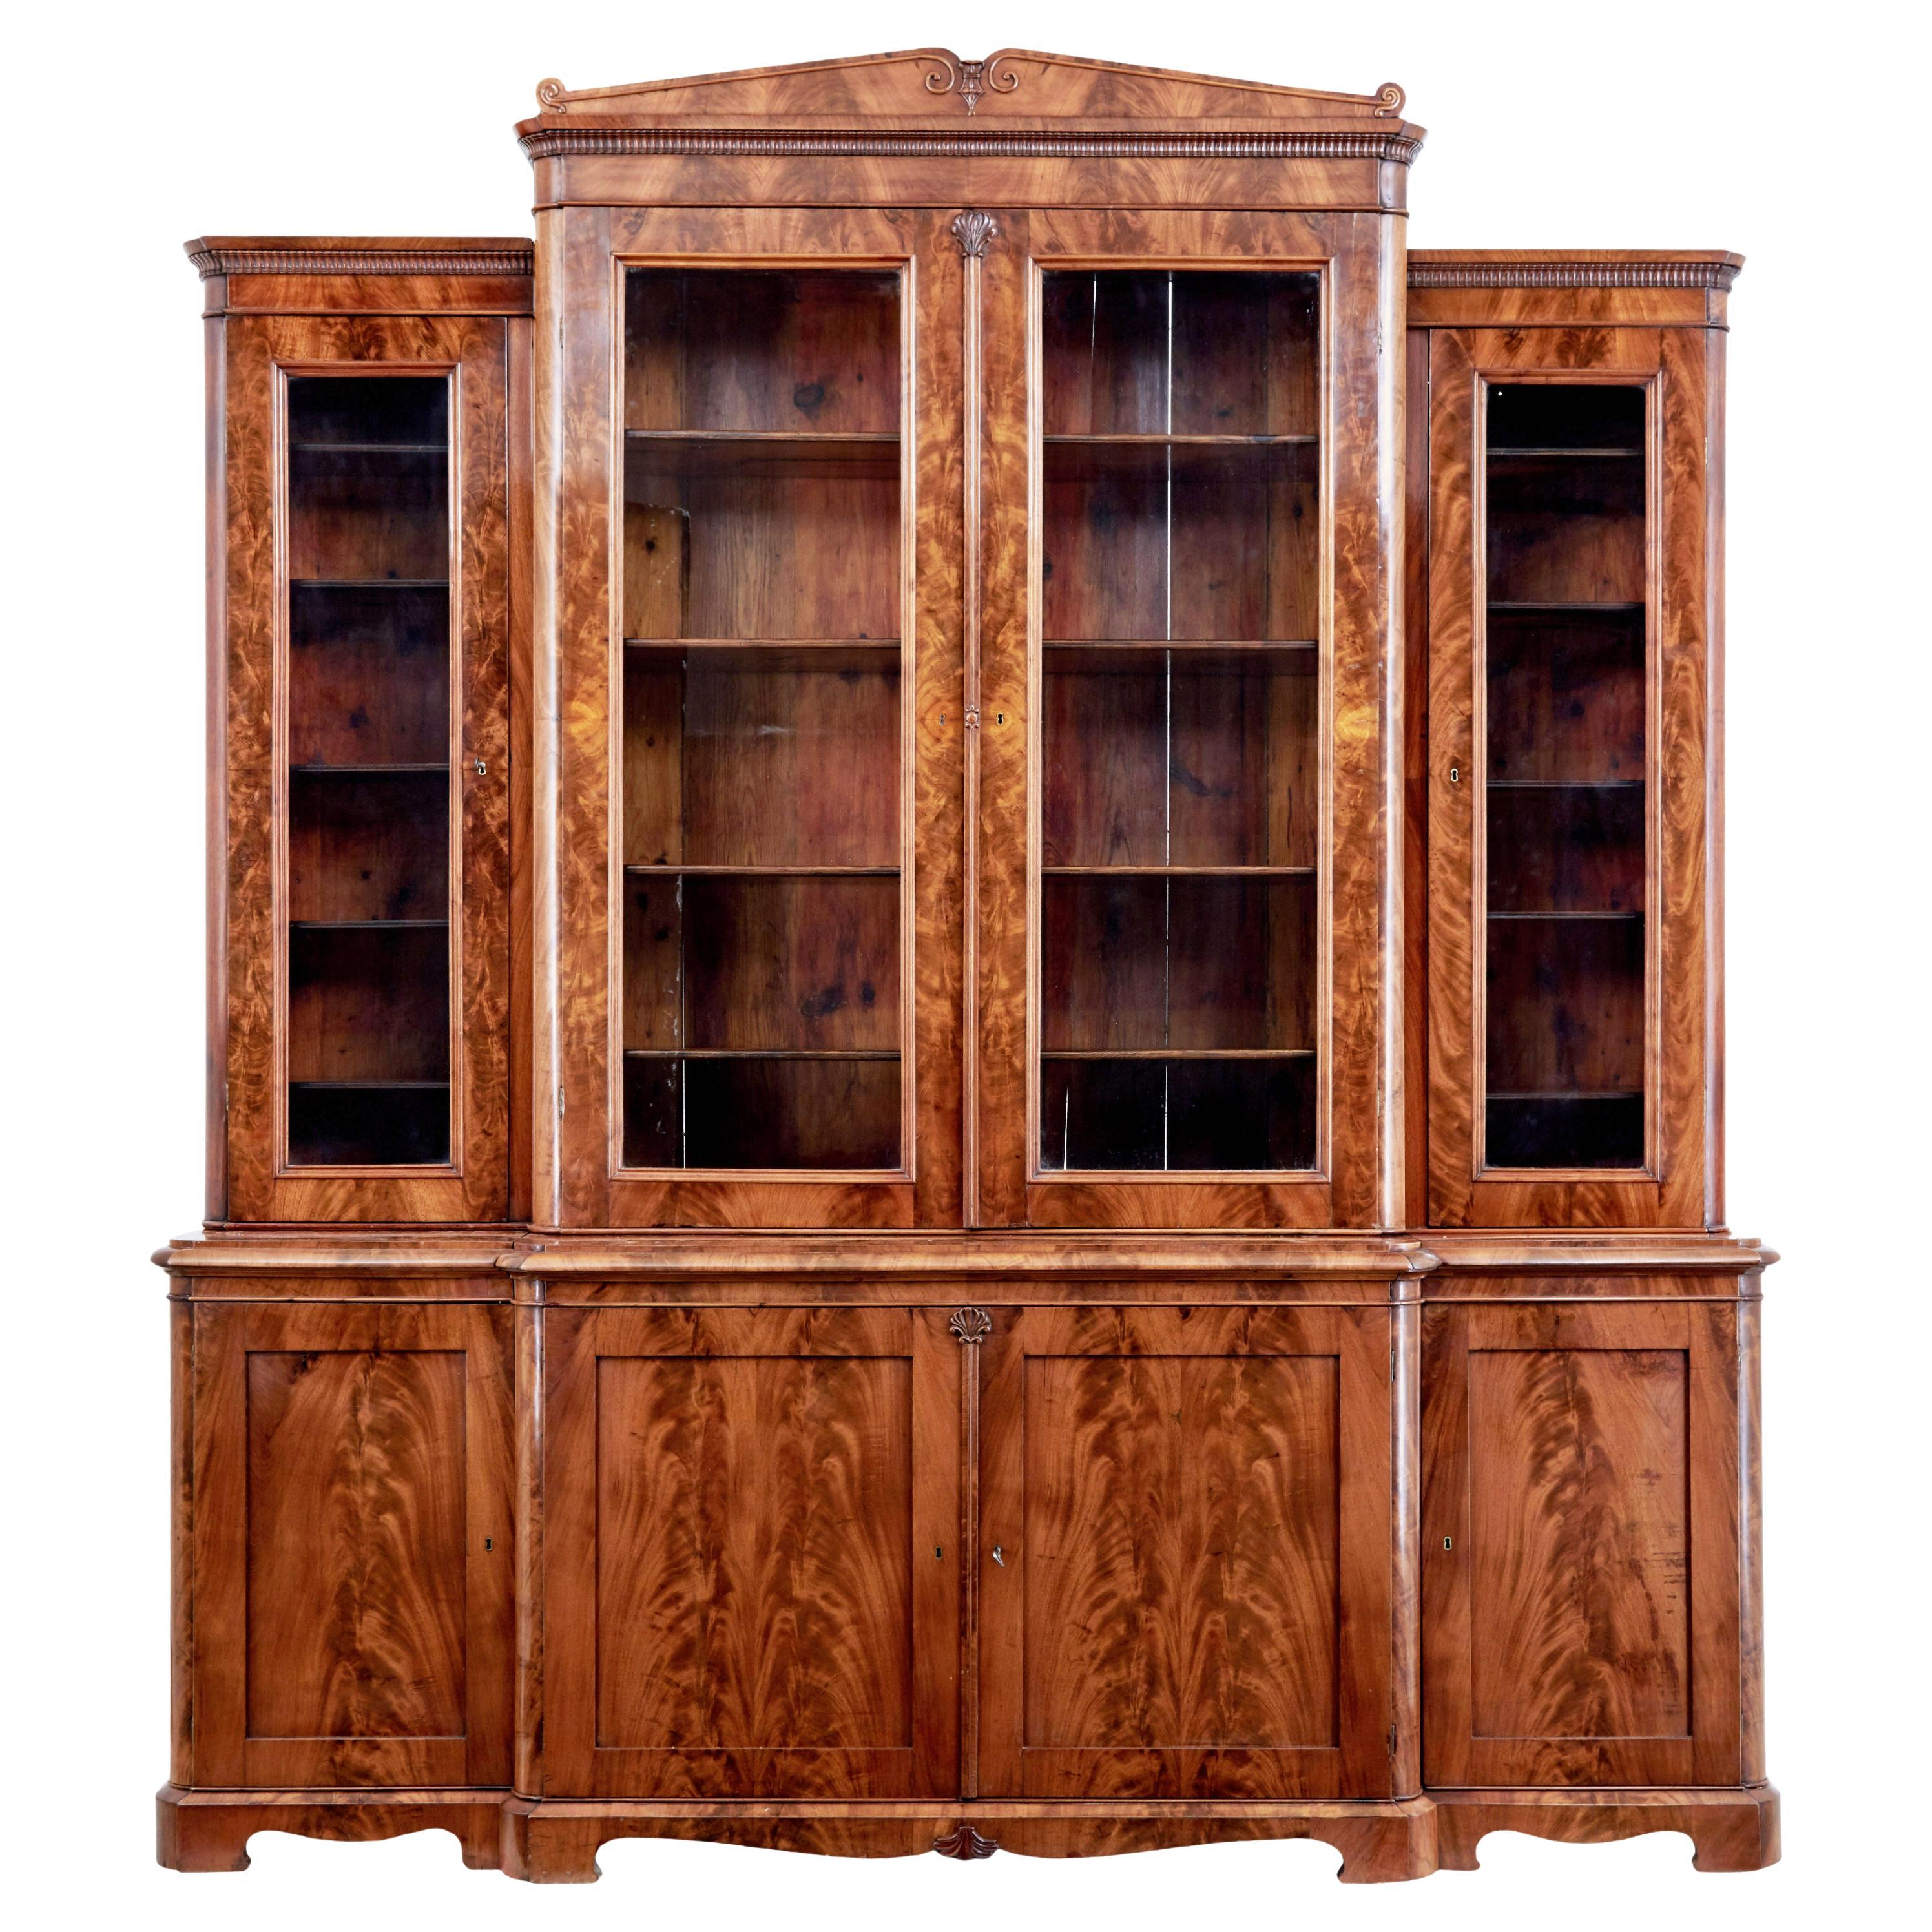 Early 19th century Scandinavian empire flame mahogany breakfront bookcase For Sale